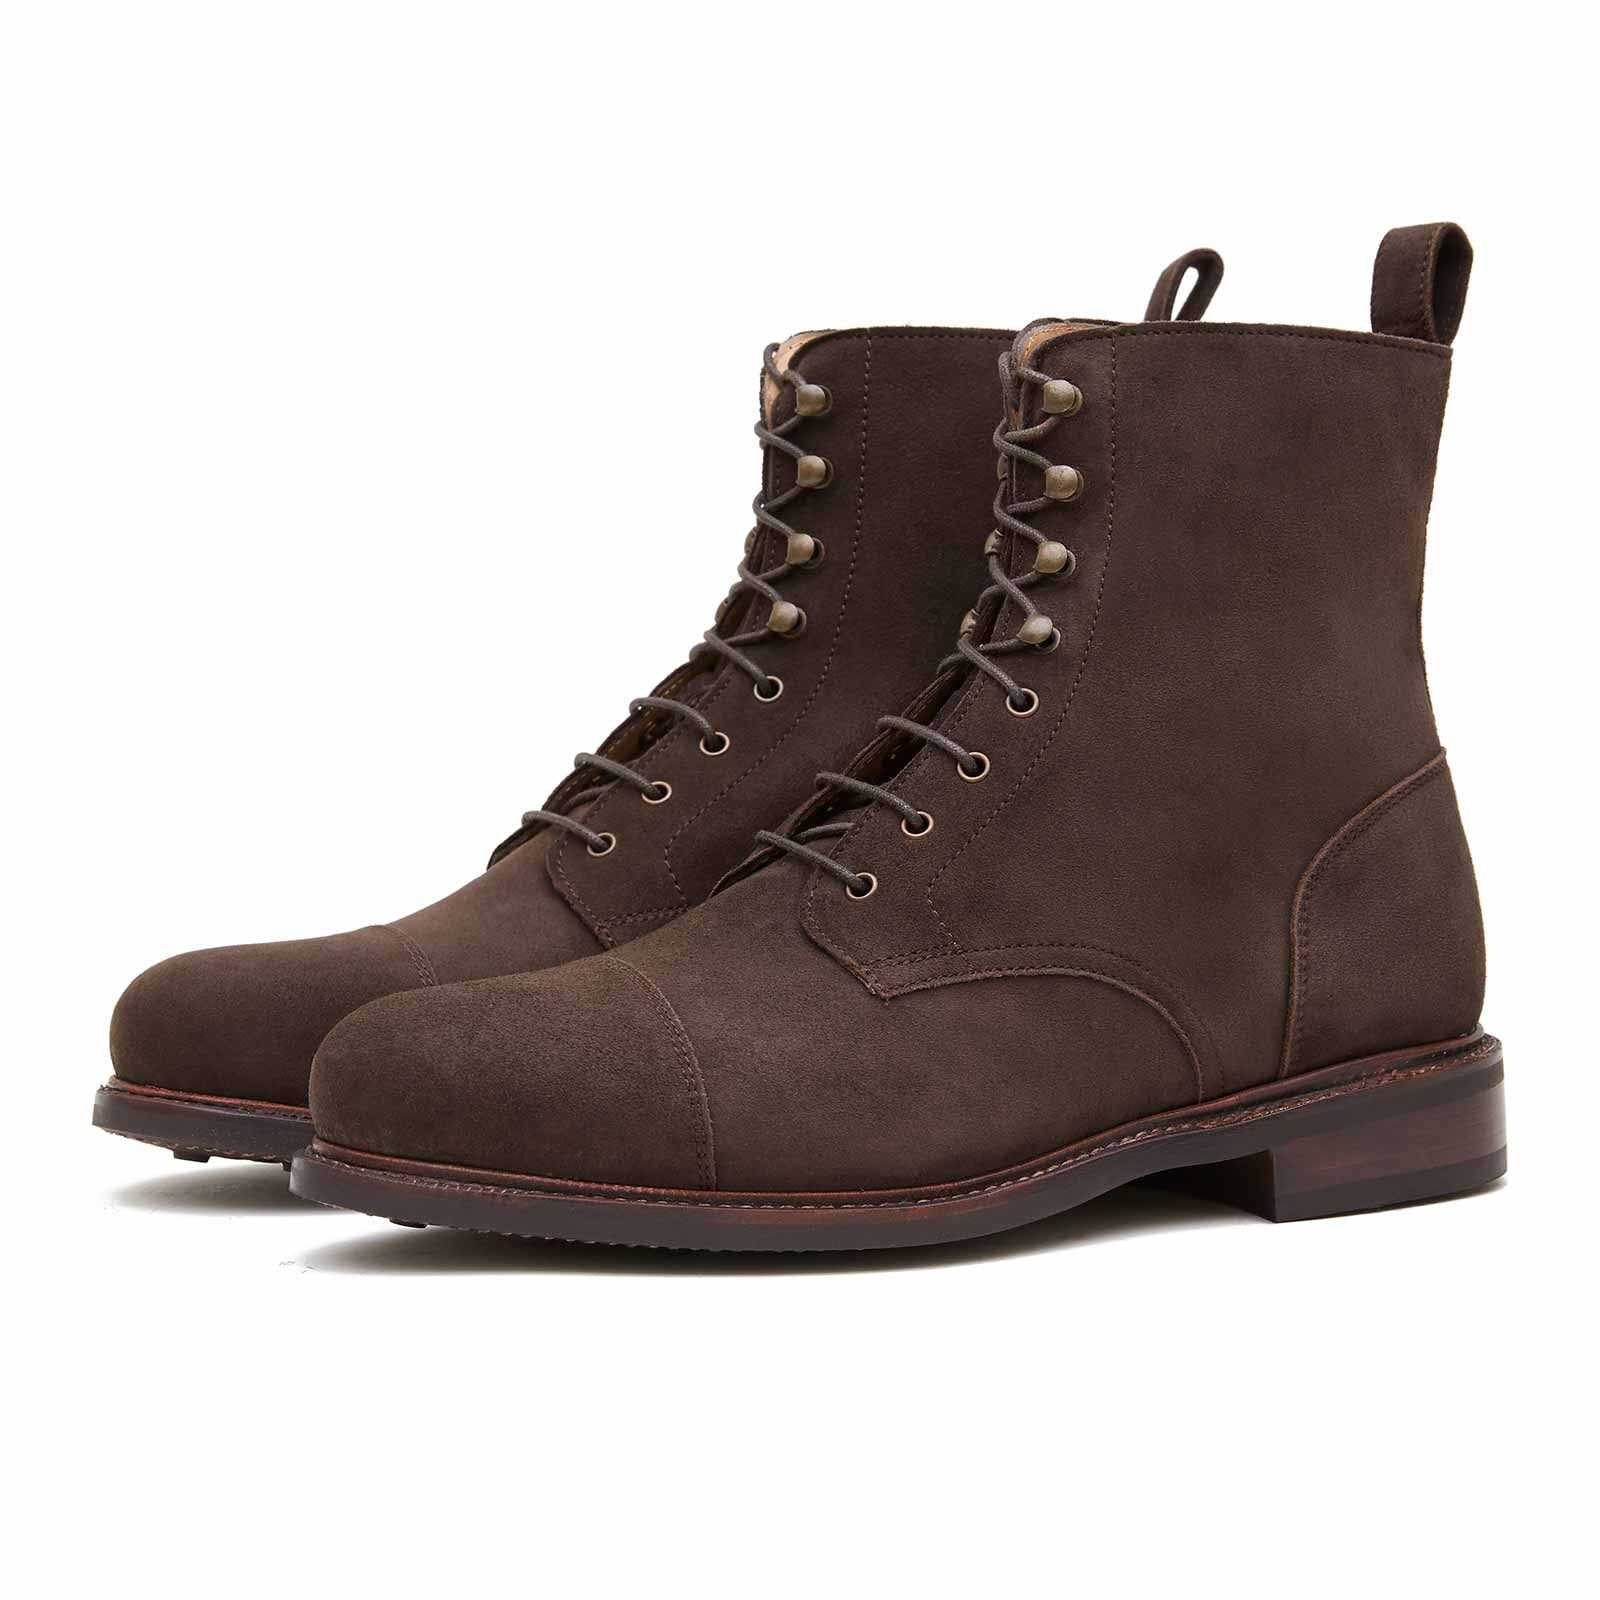 The Botas Derby Balmoral Ante Oscuro | Crownhill Shoes